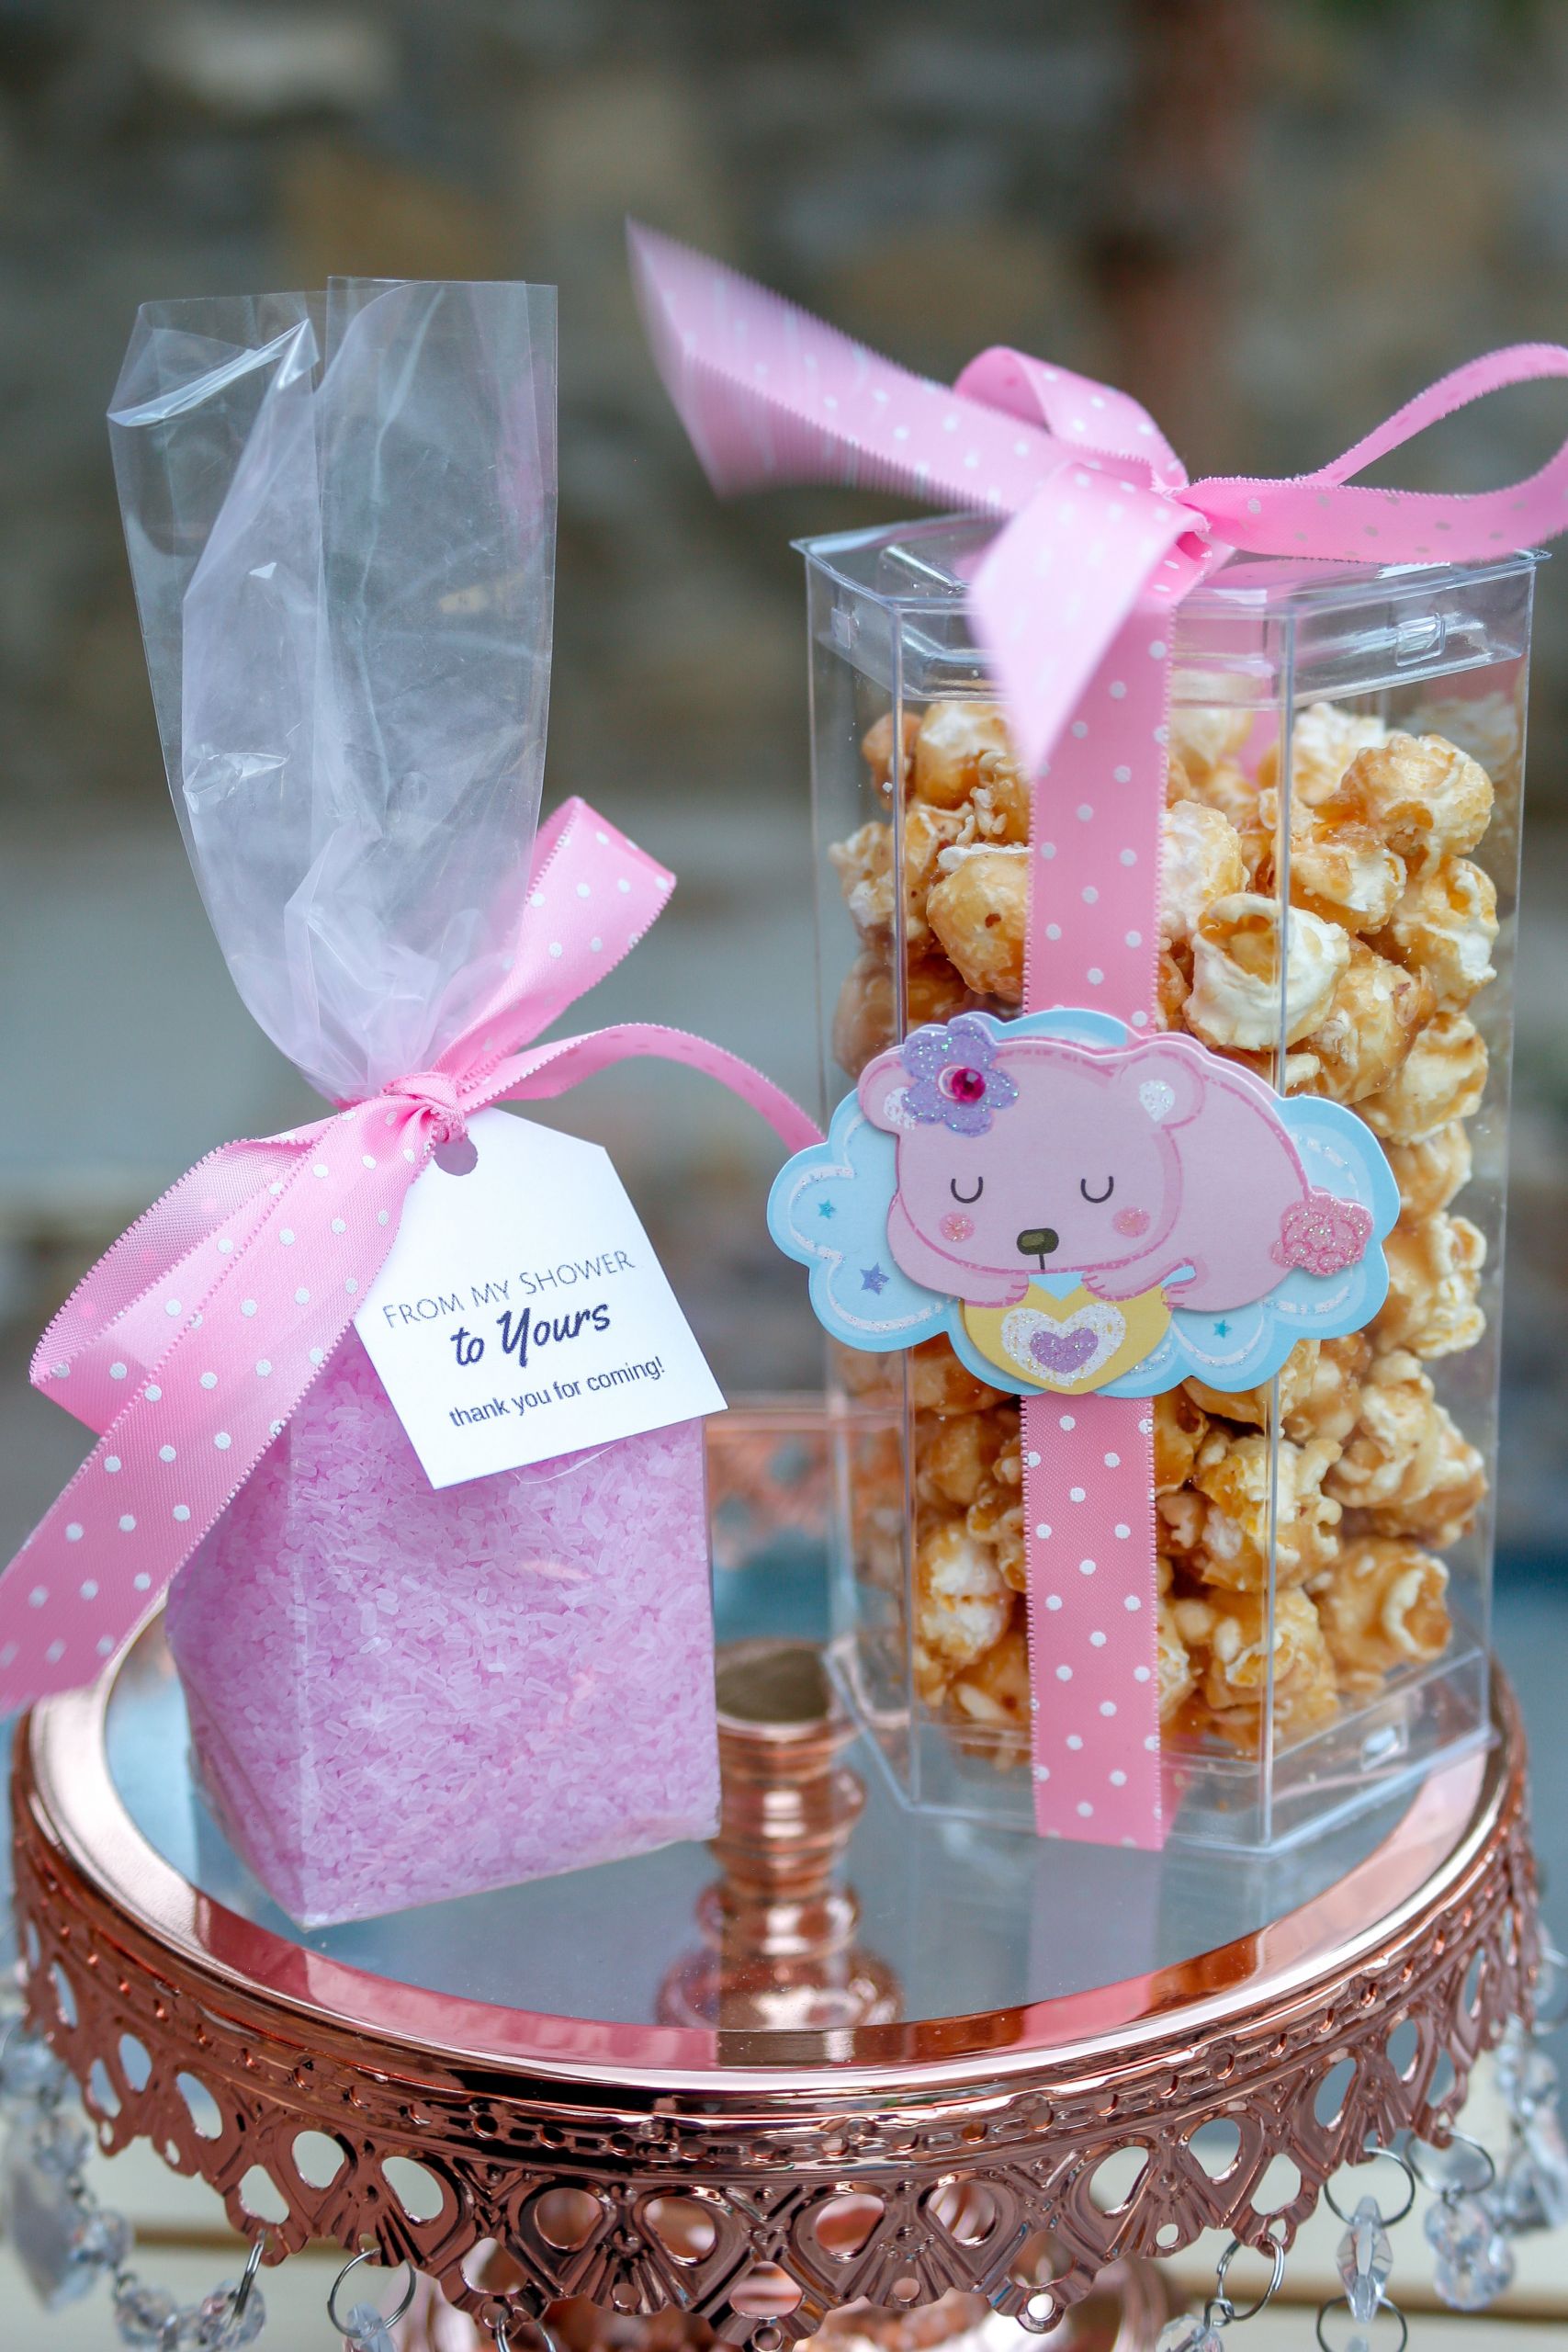 DIY Party Favors For Baby Shower
 DIY Baby Shower Favor Ideas